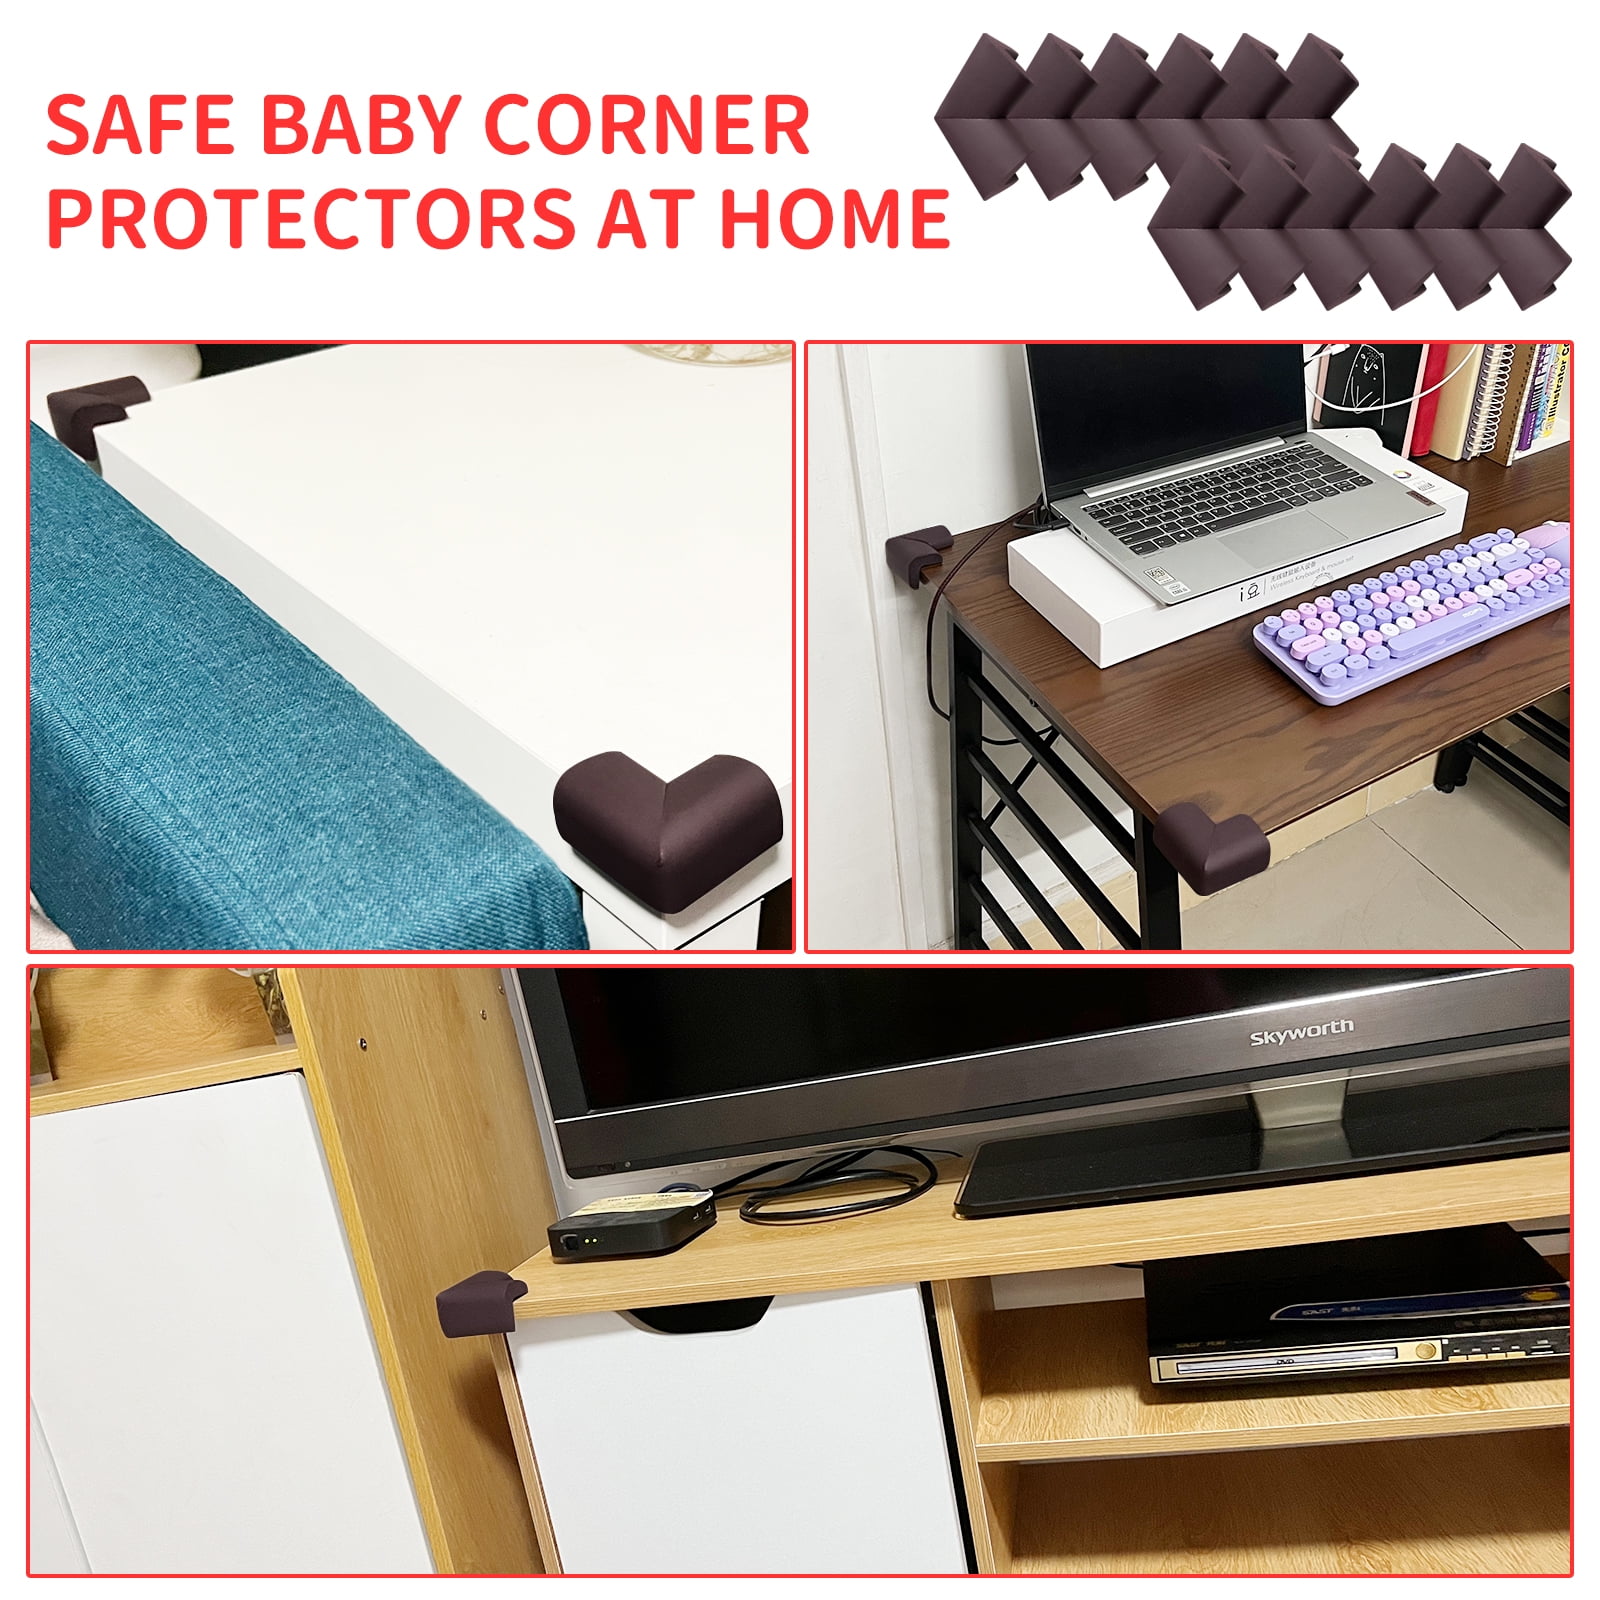 Fireplace Bumpers for Babies,Baby Proof Corners and Edges,Baby Safety  Products,Table Edge Protectors for Baby,Suitable for Furniture Desk Sharp  Corners Guards(Brown Purple(4 Corner&6.5ft Bumpers)) Brown Purple(4  Corner&6.5ft/78 Inch Safety Bumpers)